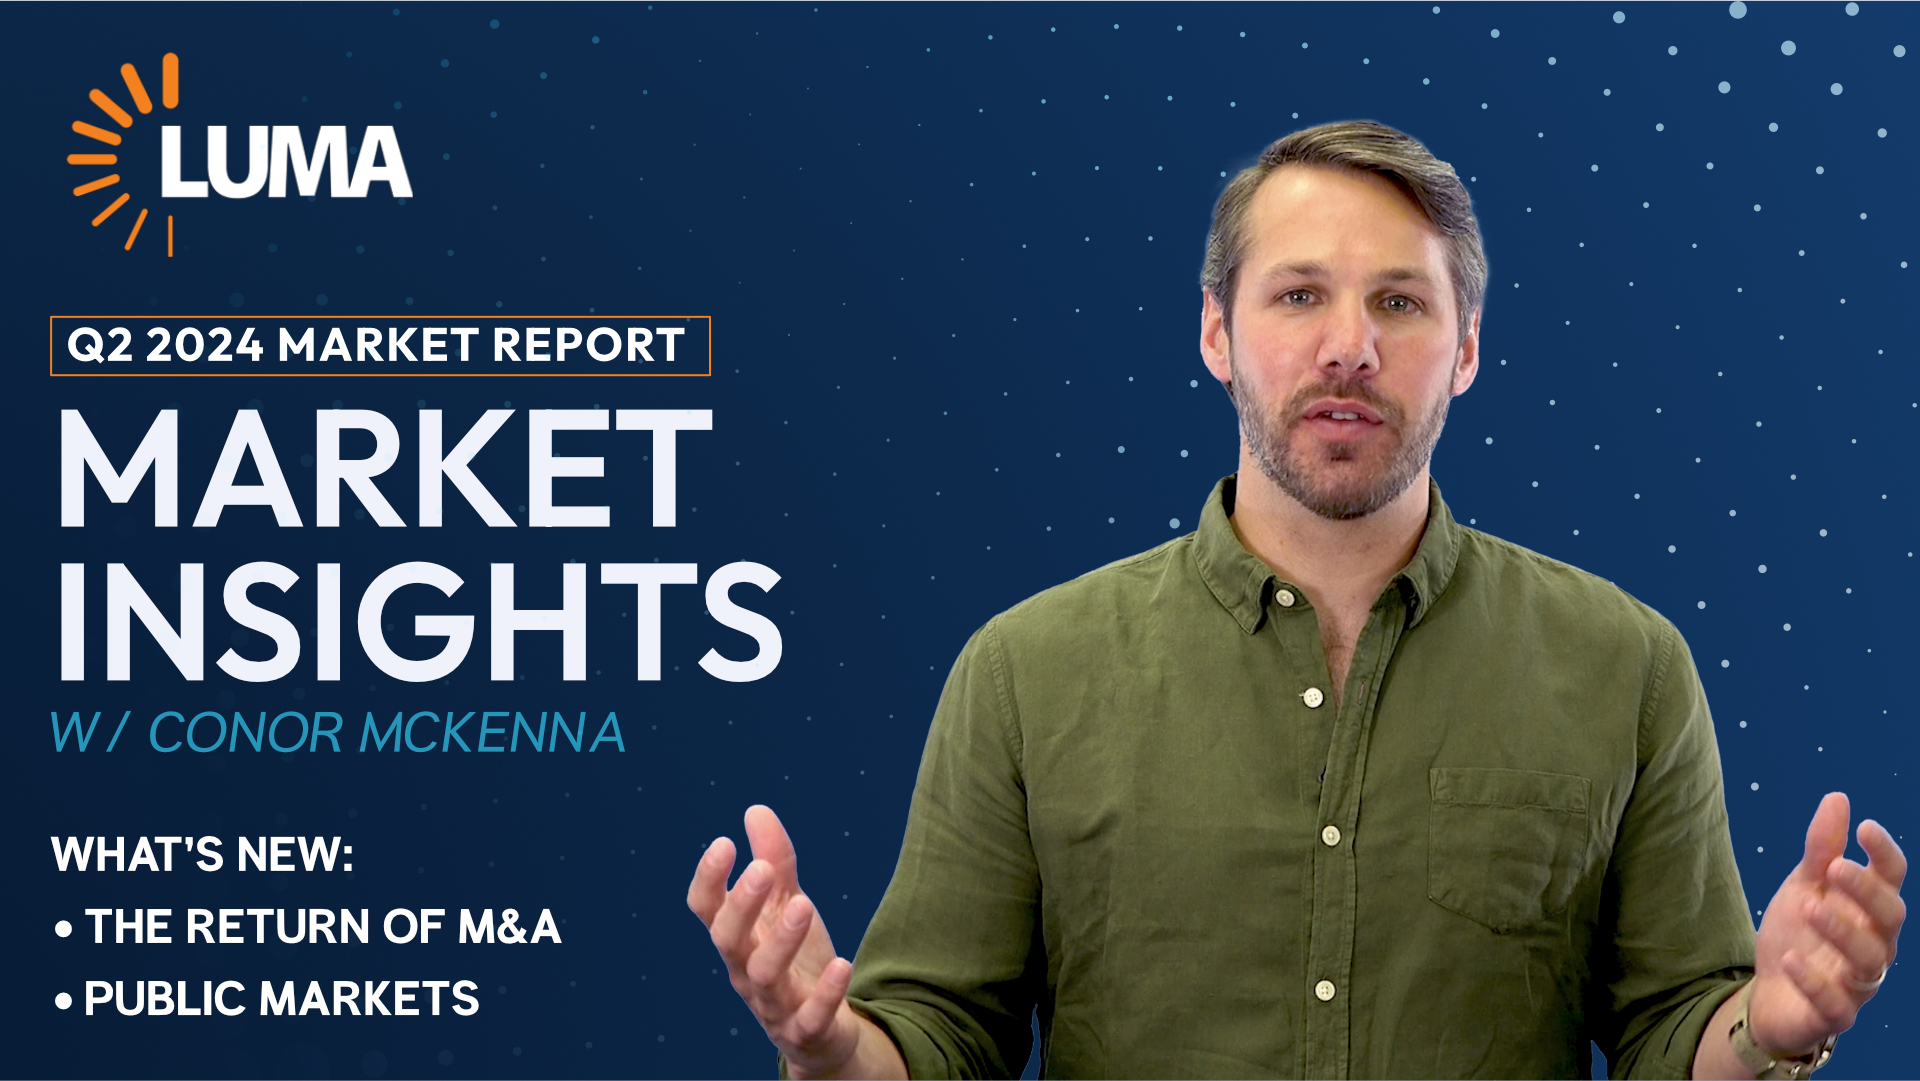 Market Insights: The Return of M&A